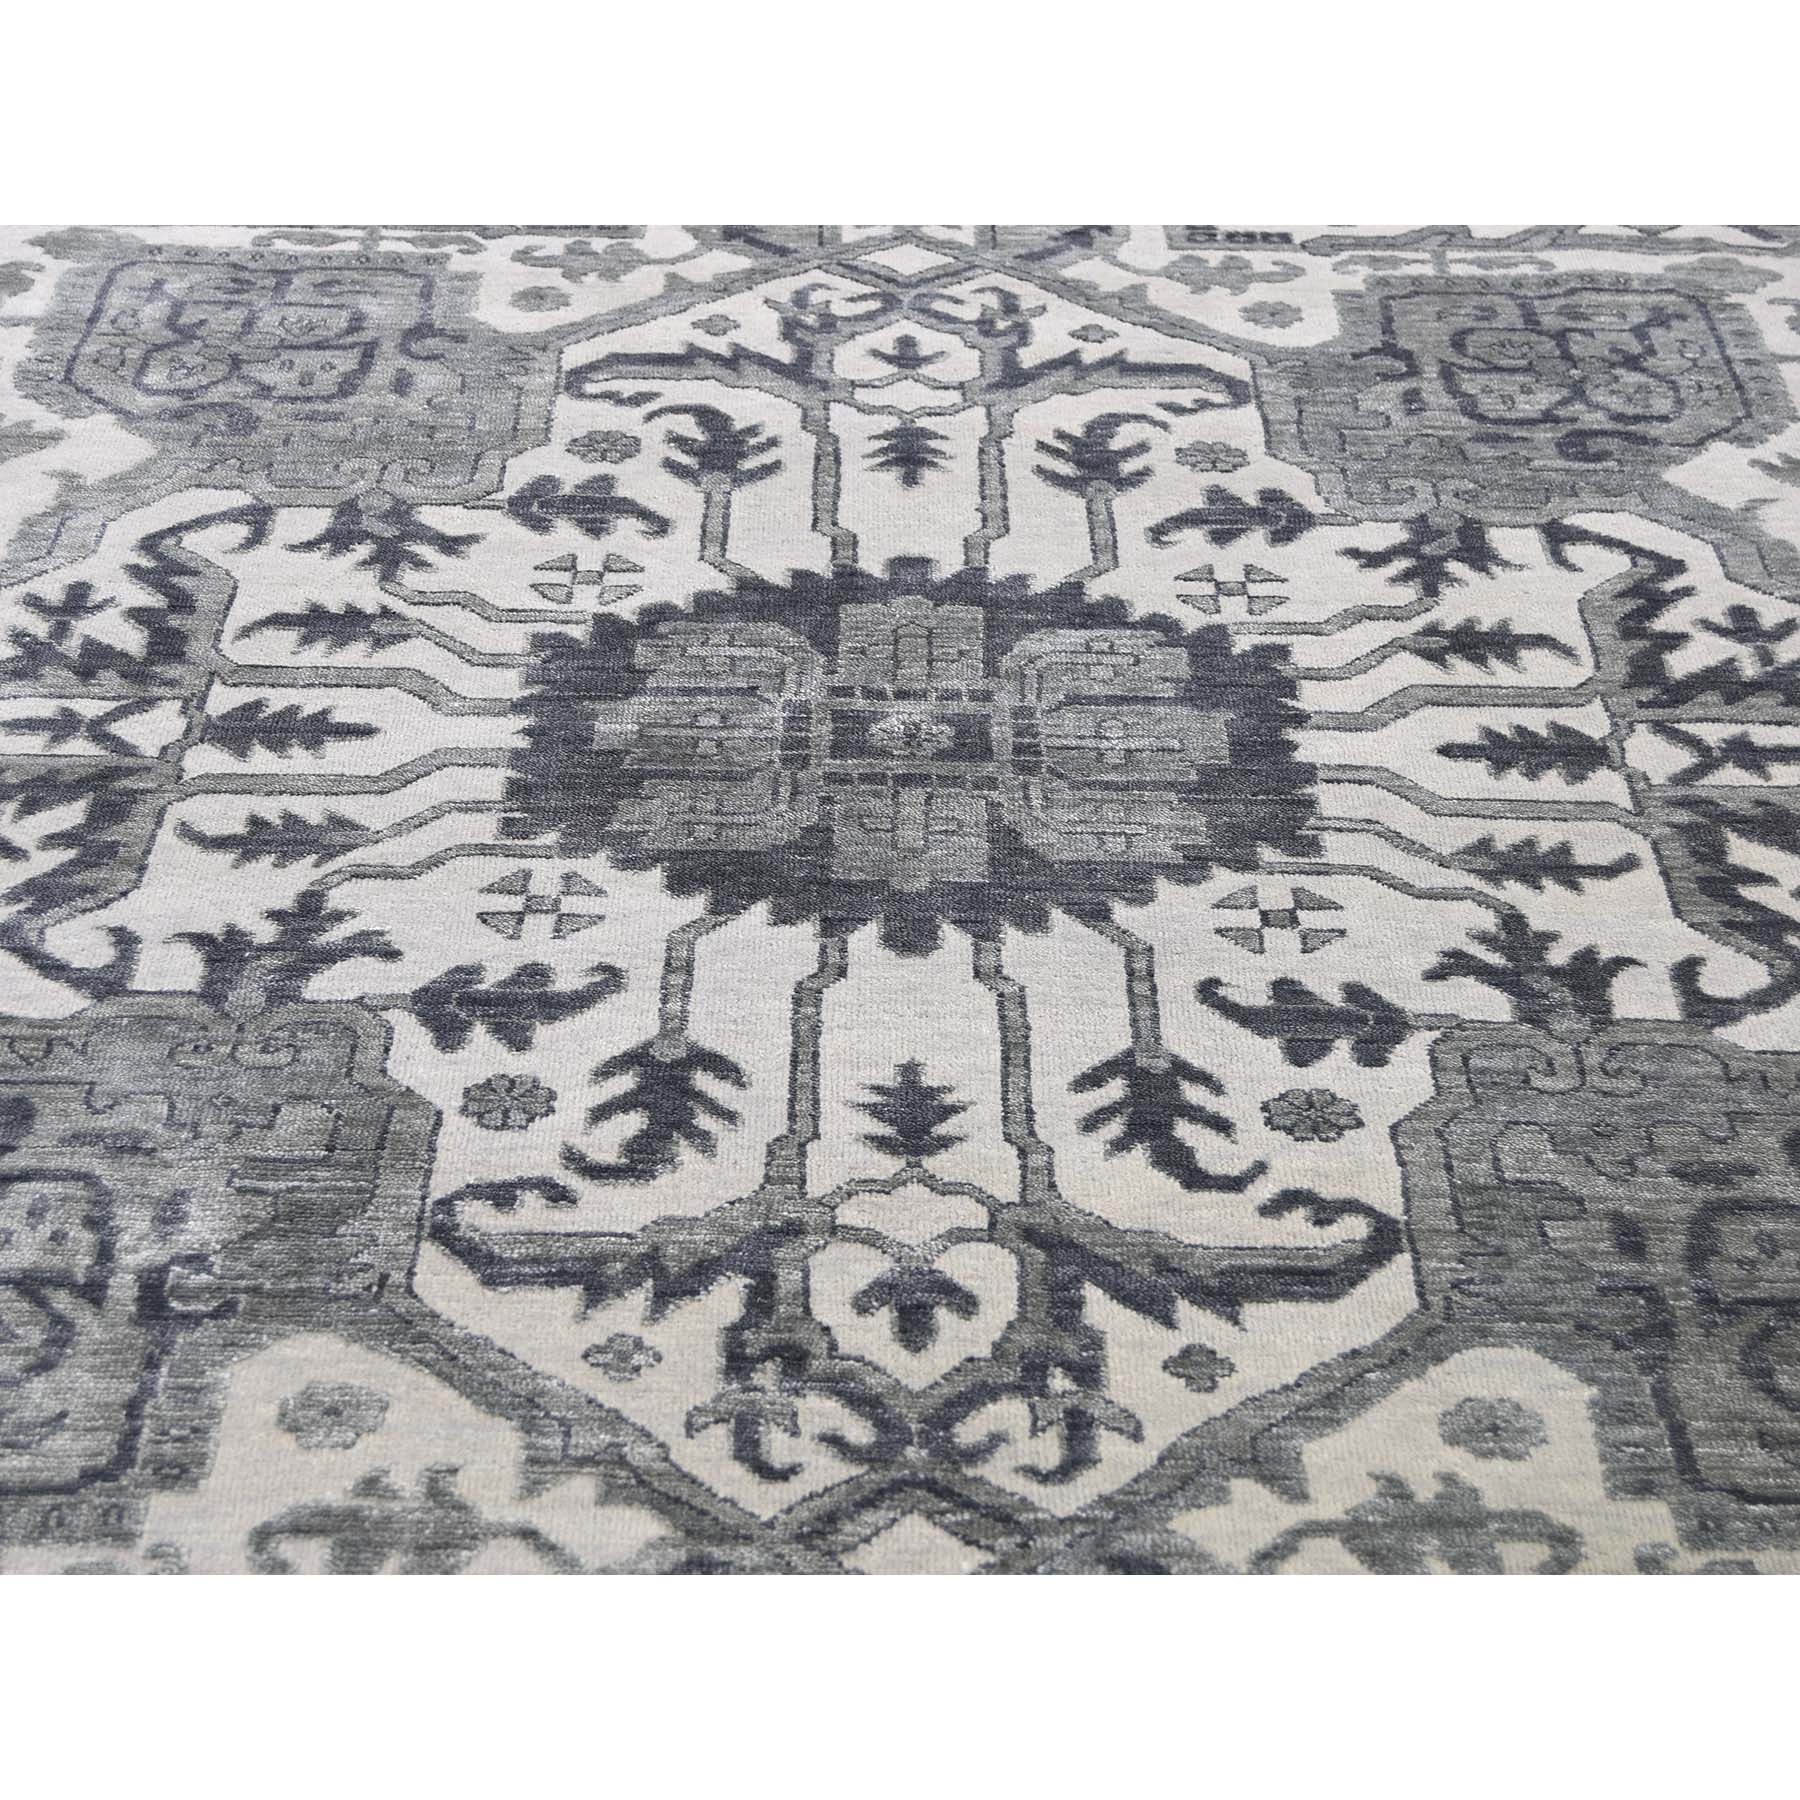 10-x14- Silver Heriz Design Wool And Silk Hi-lo Pile Hand-Knotted Oriental Rug 